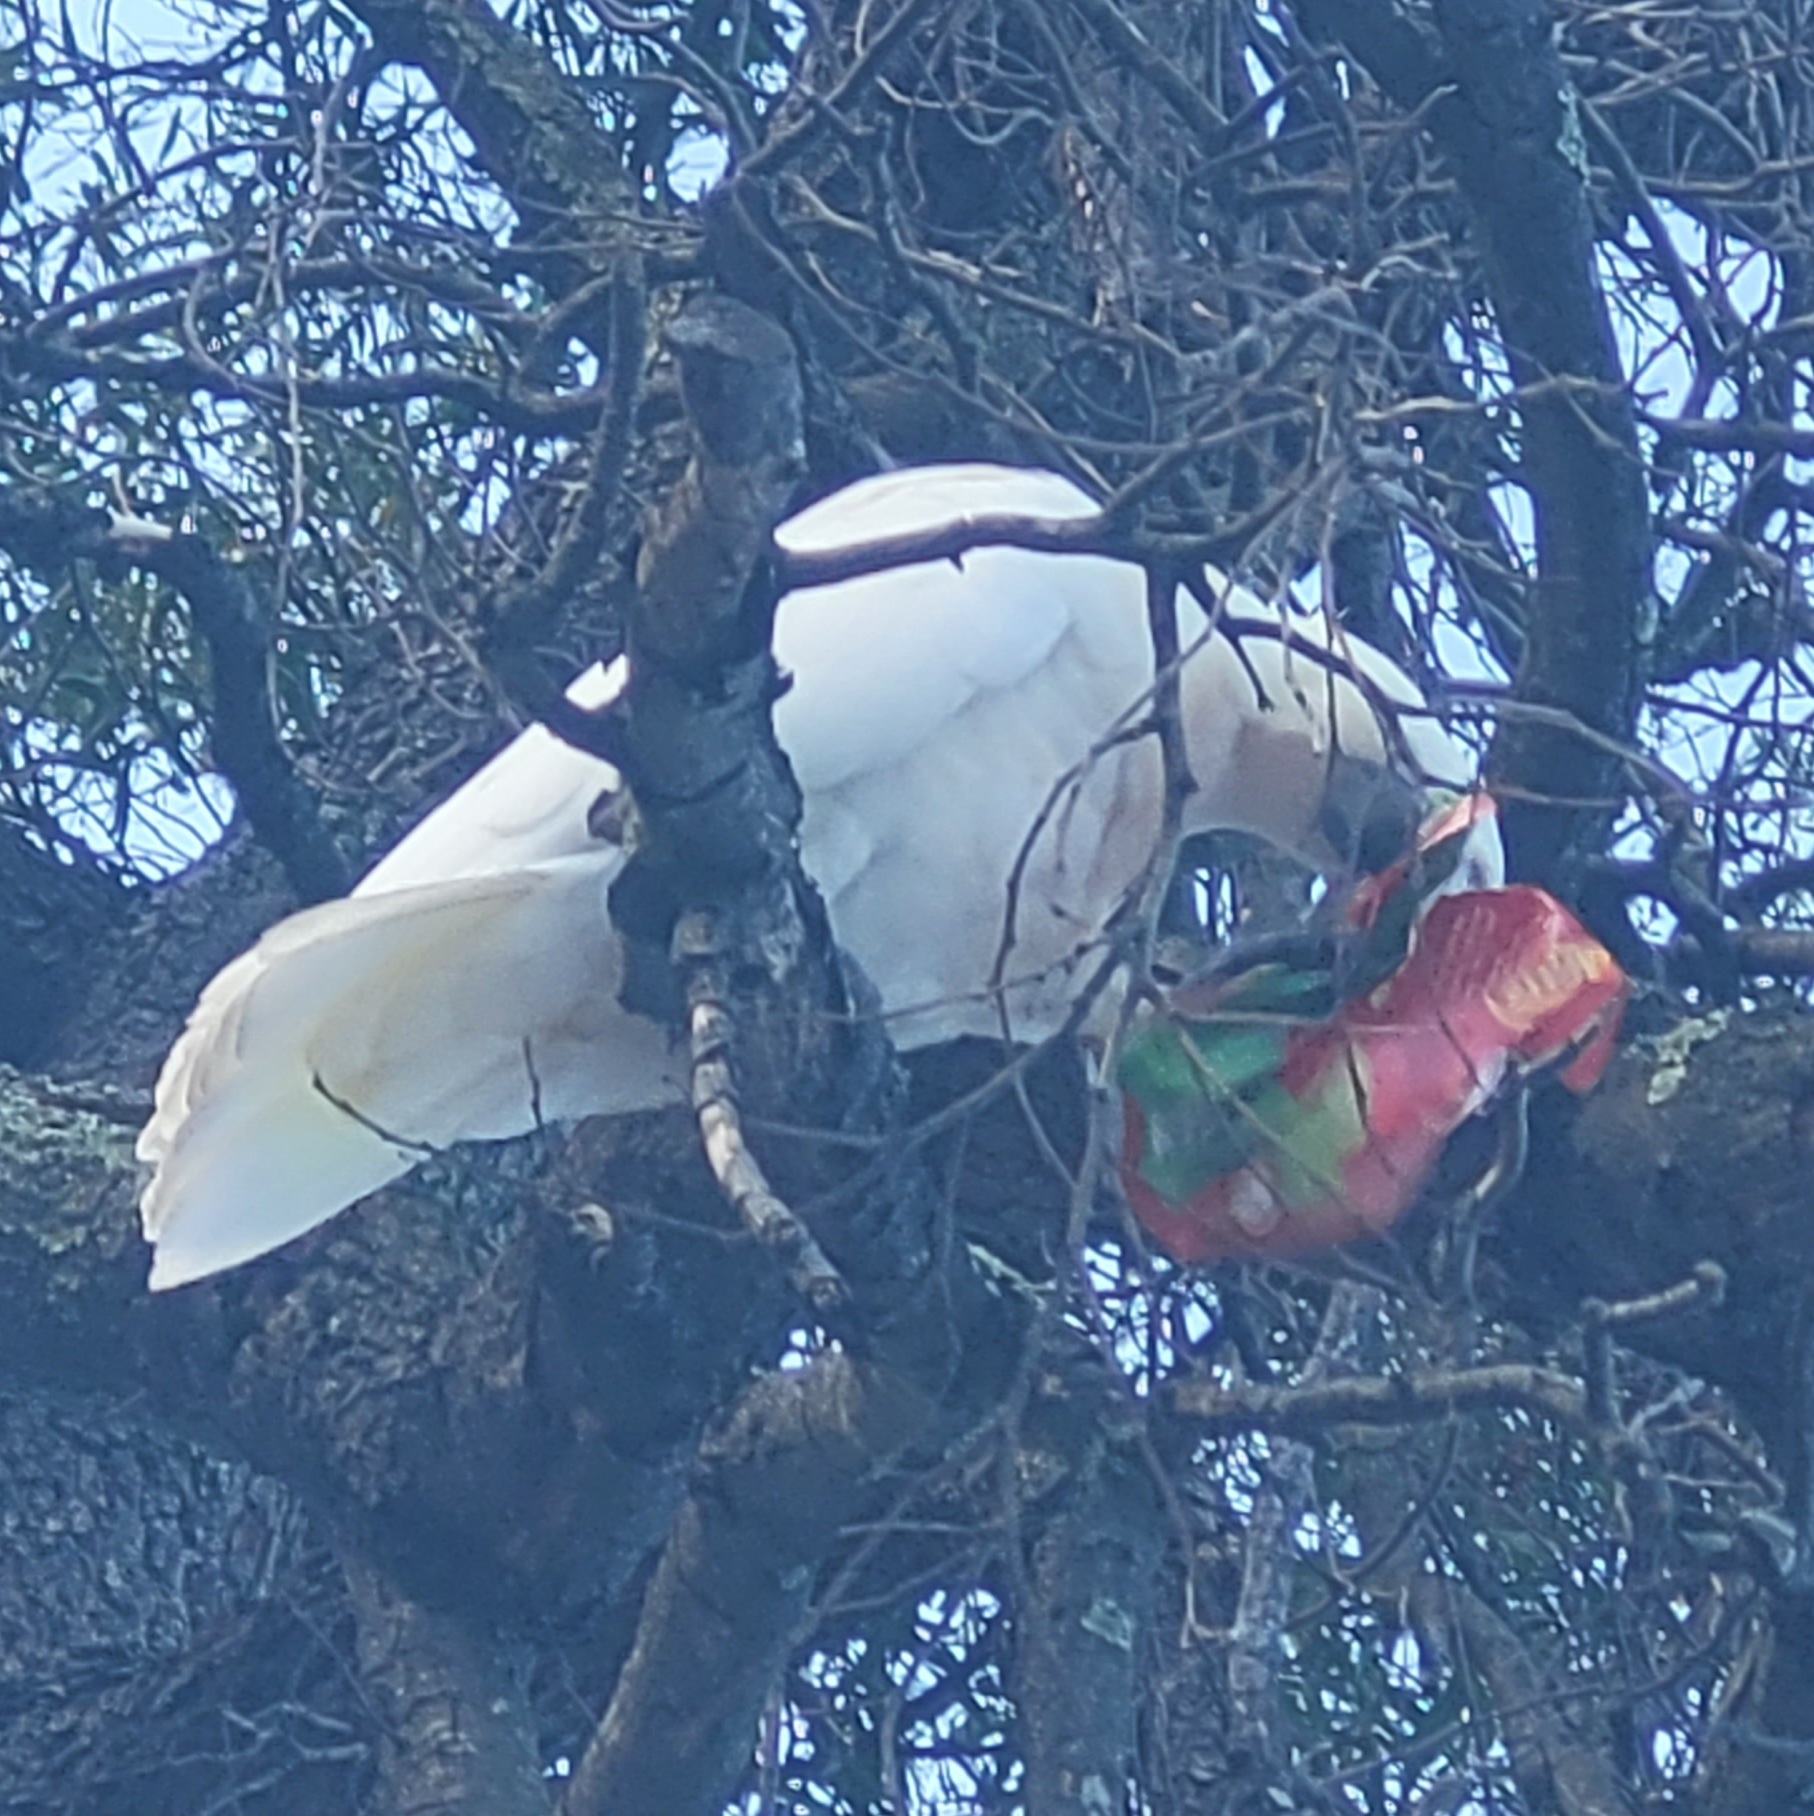 Perched on an overhead branch, a Sulphur-crested Cockatoo buries its white-and-yellow head into an open bag of jelly candies.